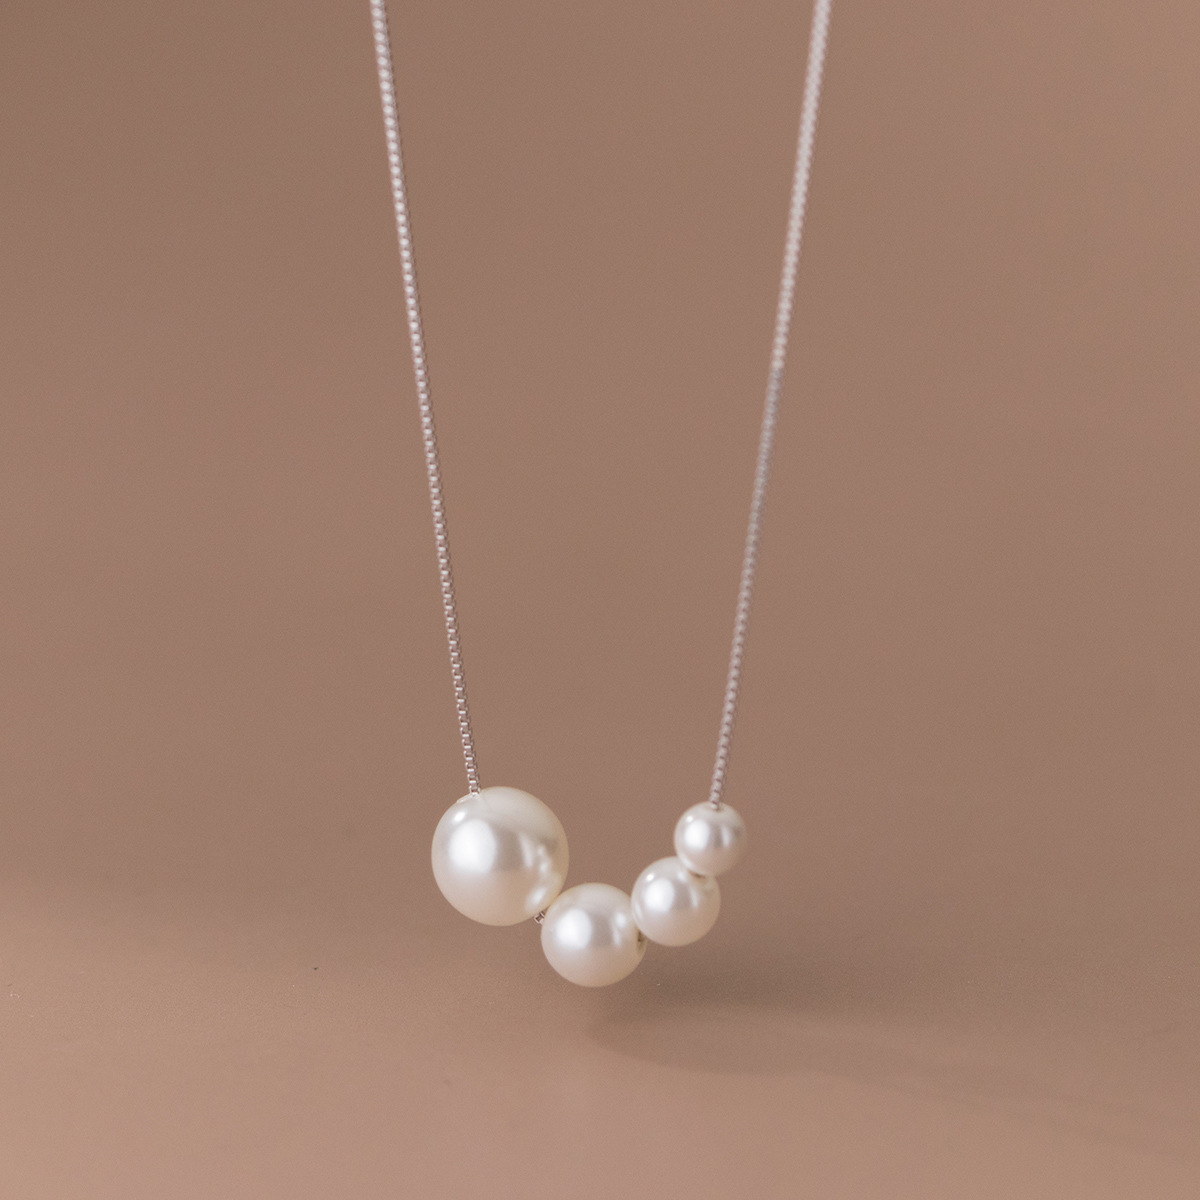 S925 Silver Niche Design Large and Small Pearls Necklace Women's Cold Style Affordable Luxury Fashion Simple Graceful Clavicle Chain